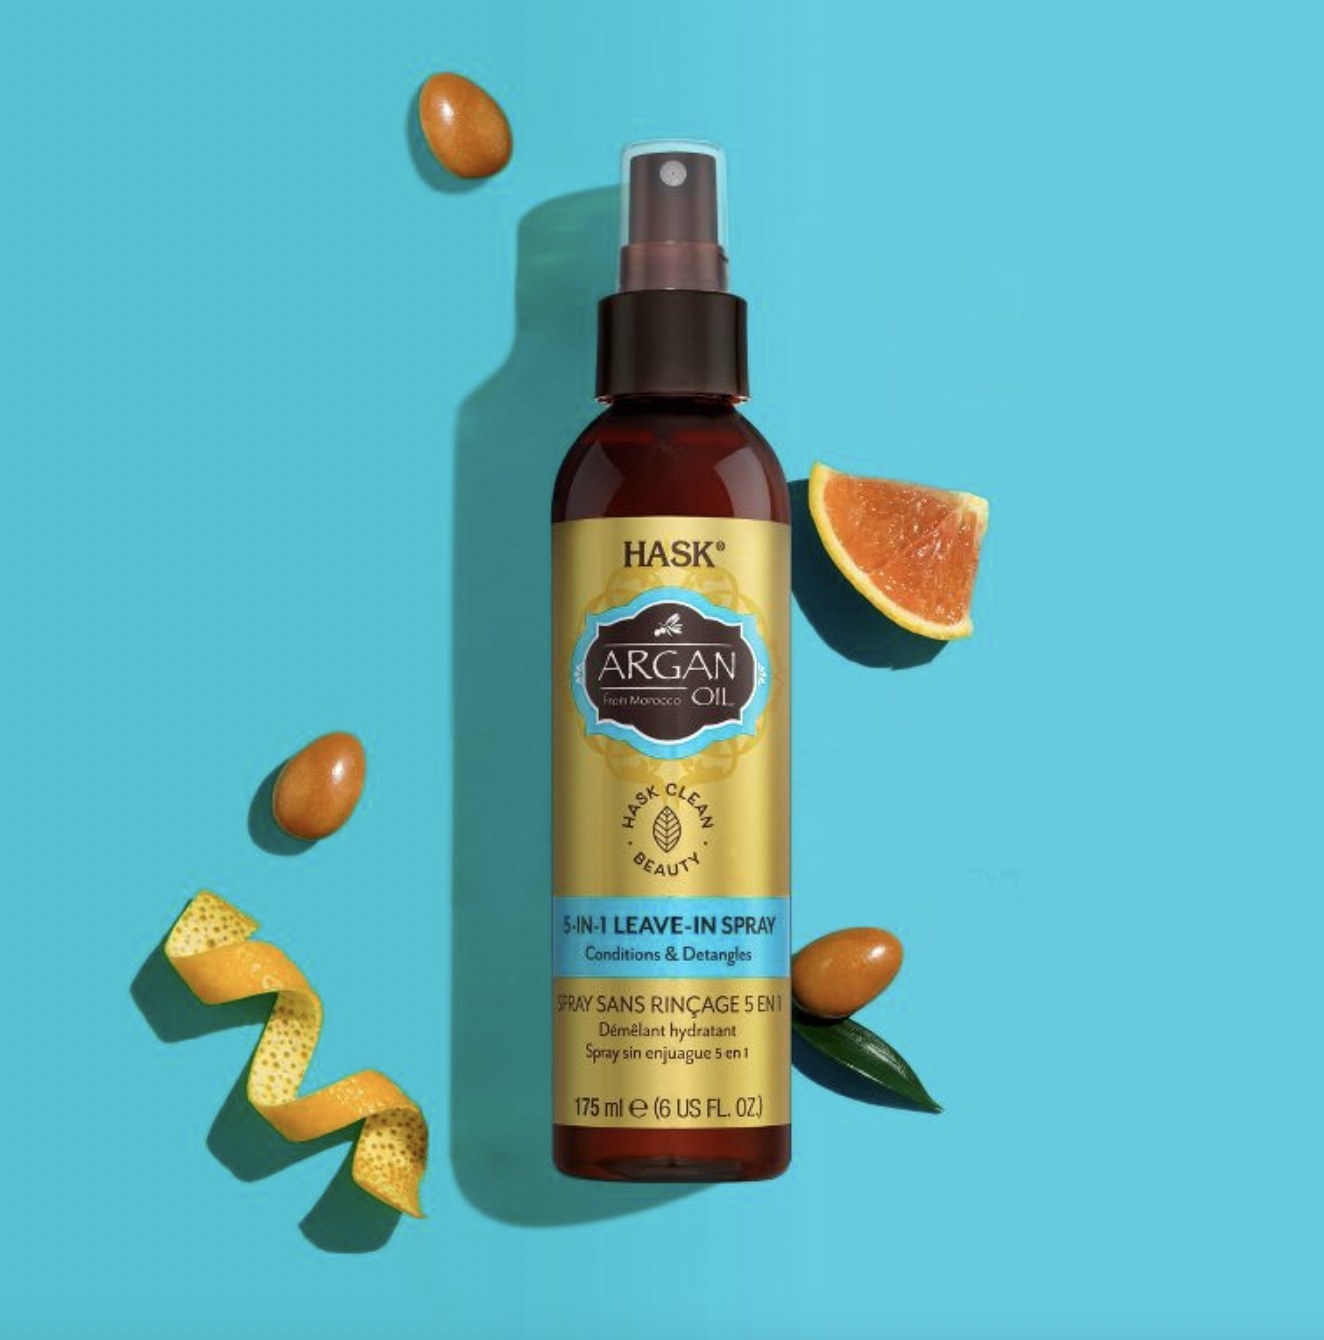 A bottle of leave-in hair spray with an orange peel, seeds and sliced citrus